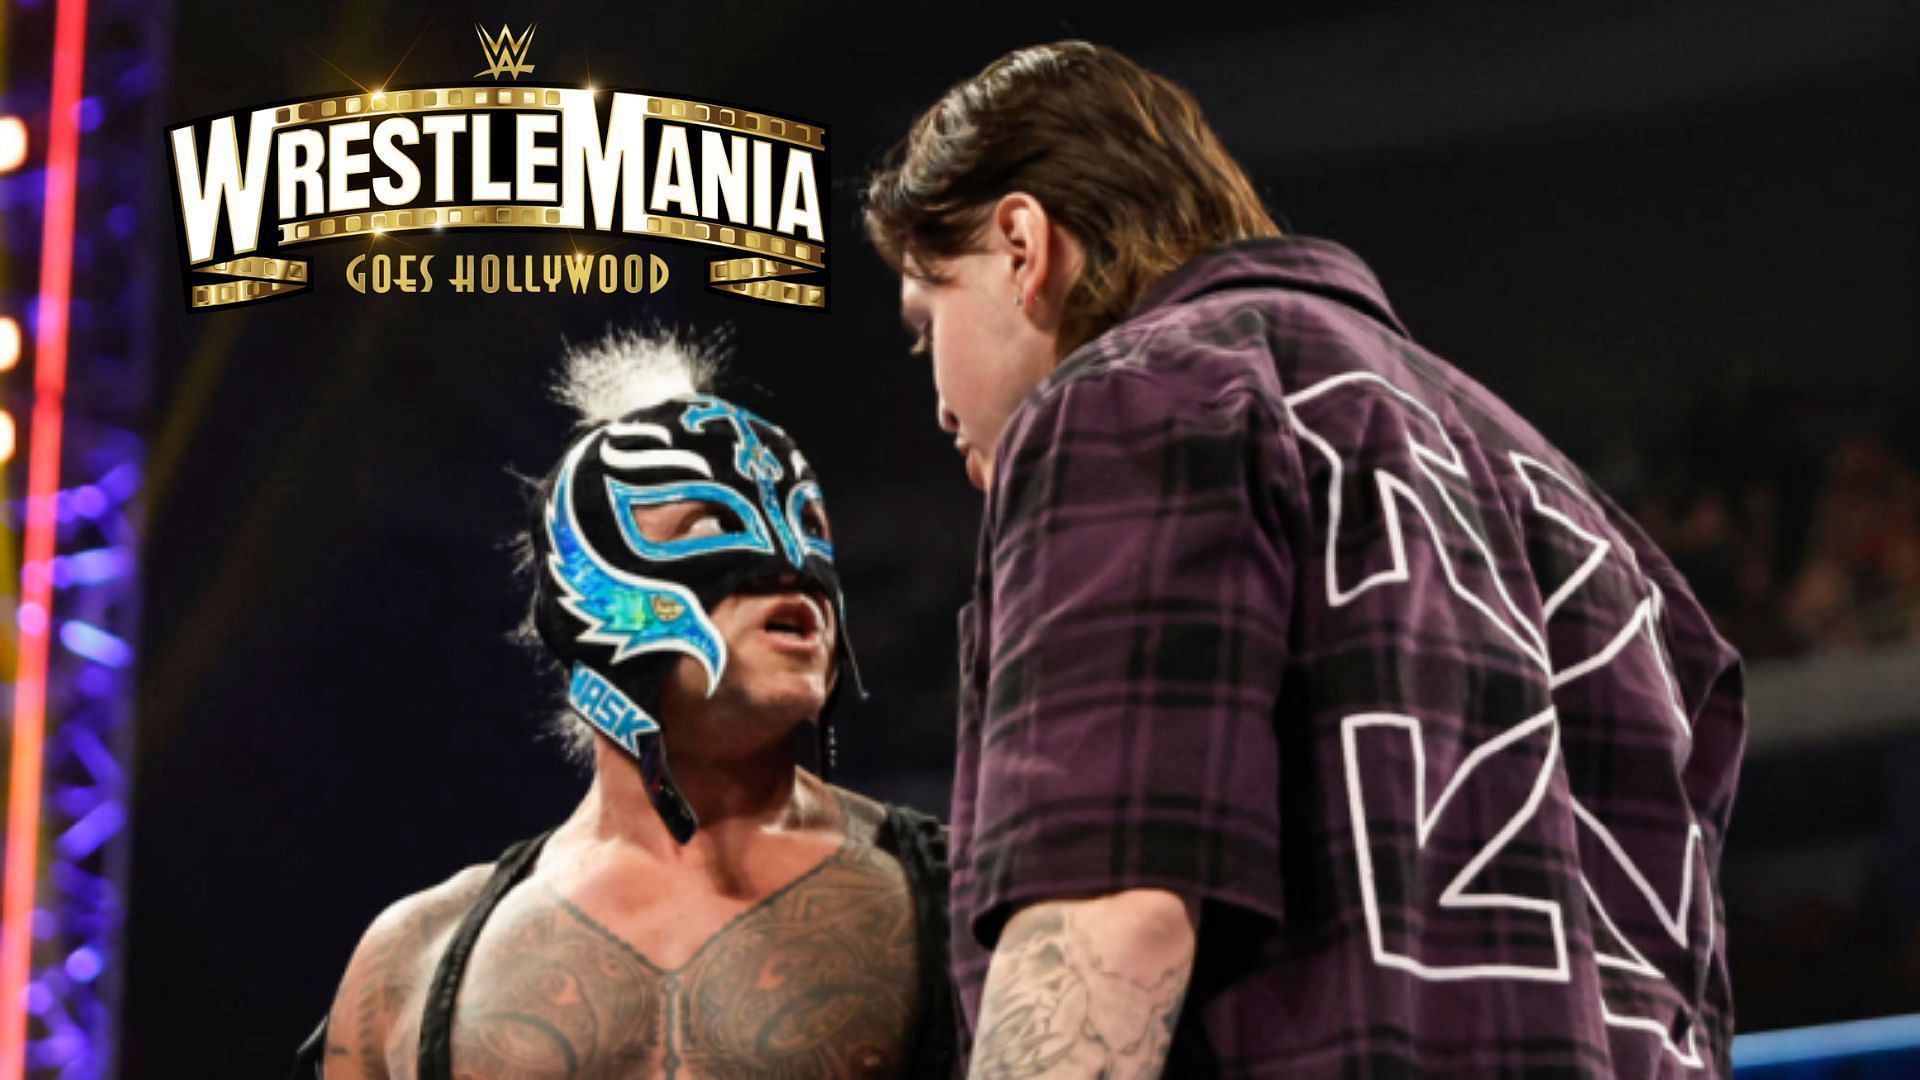 Dominik Mysterio has issued a challenge to Rey Mysterio for a match at WrestleMania 39